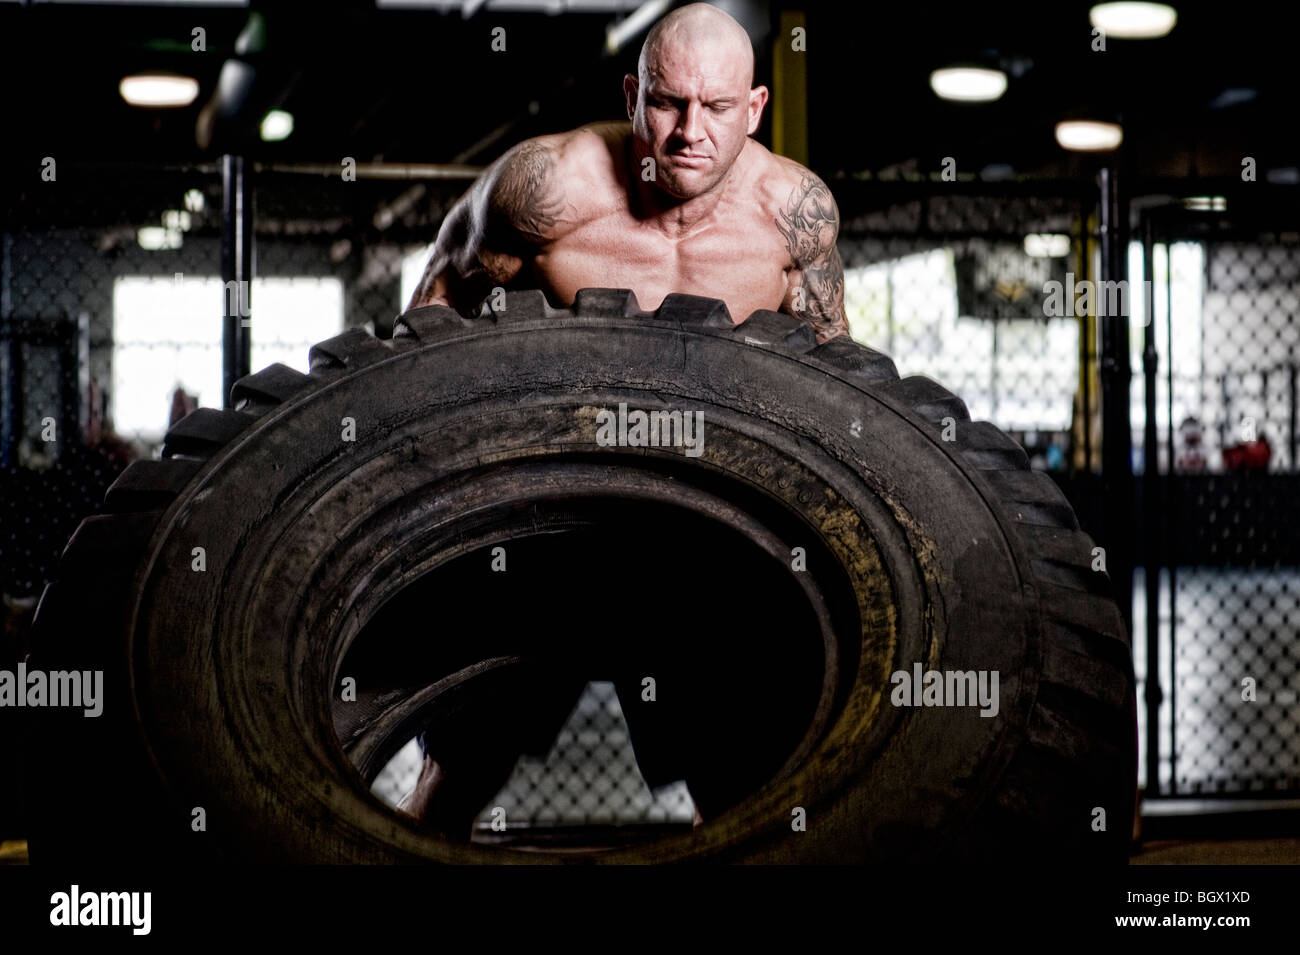 Strong man lifting a tire. Stock Photo